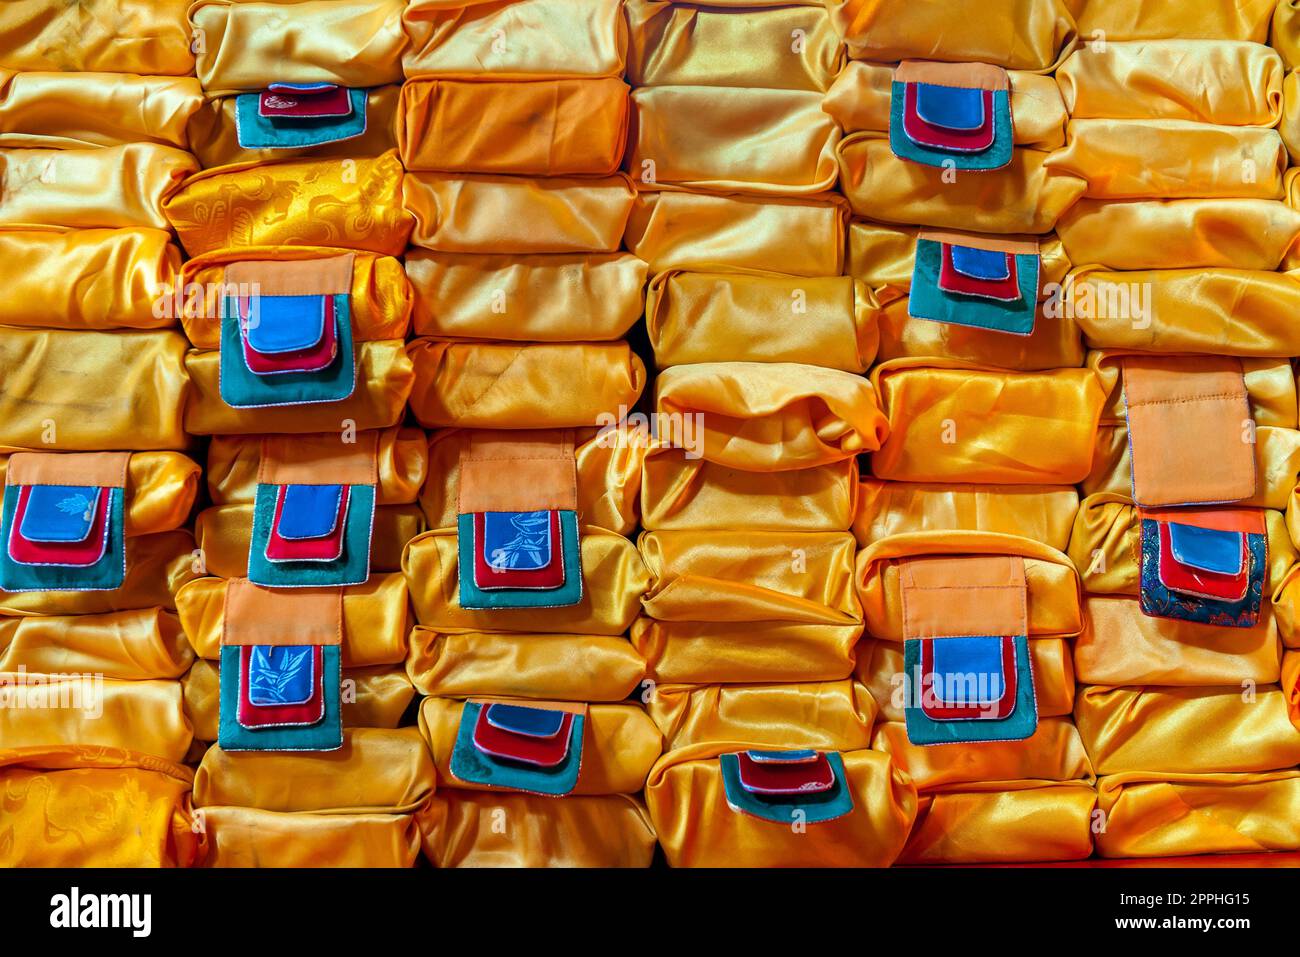 Close up of a stack of prayer books wrapped in orange cloths at a Buddhist monastery in Mongolia, Central Asia. Stock Photo